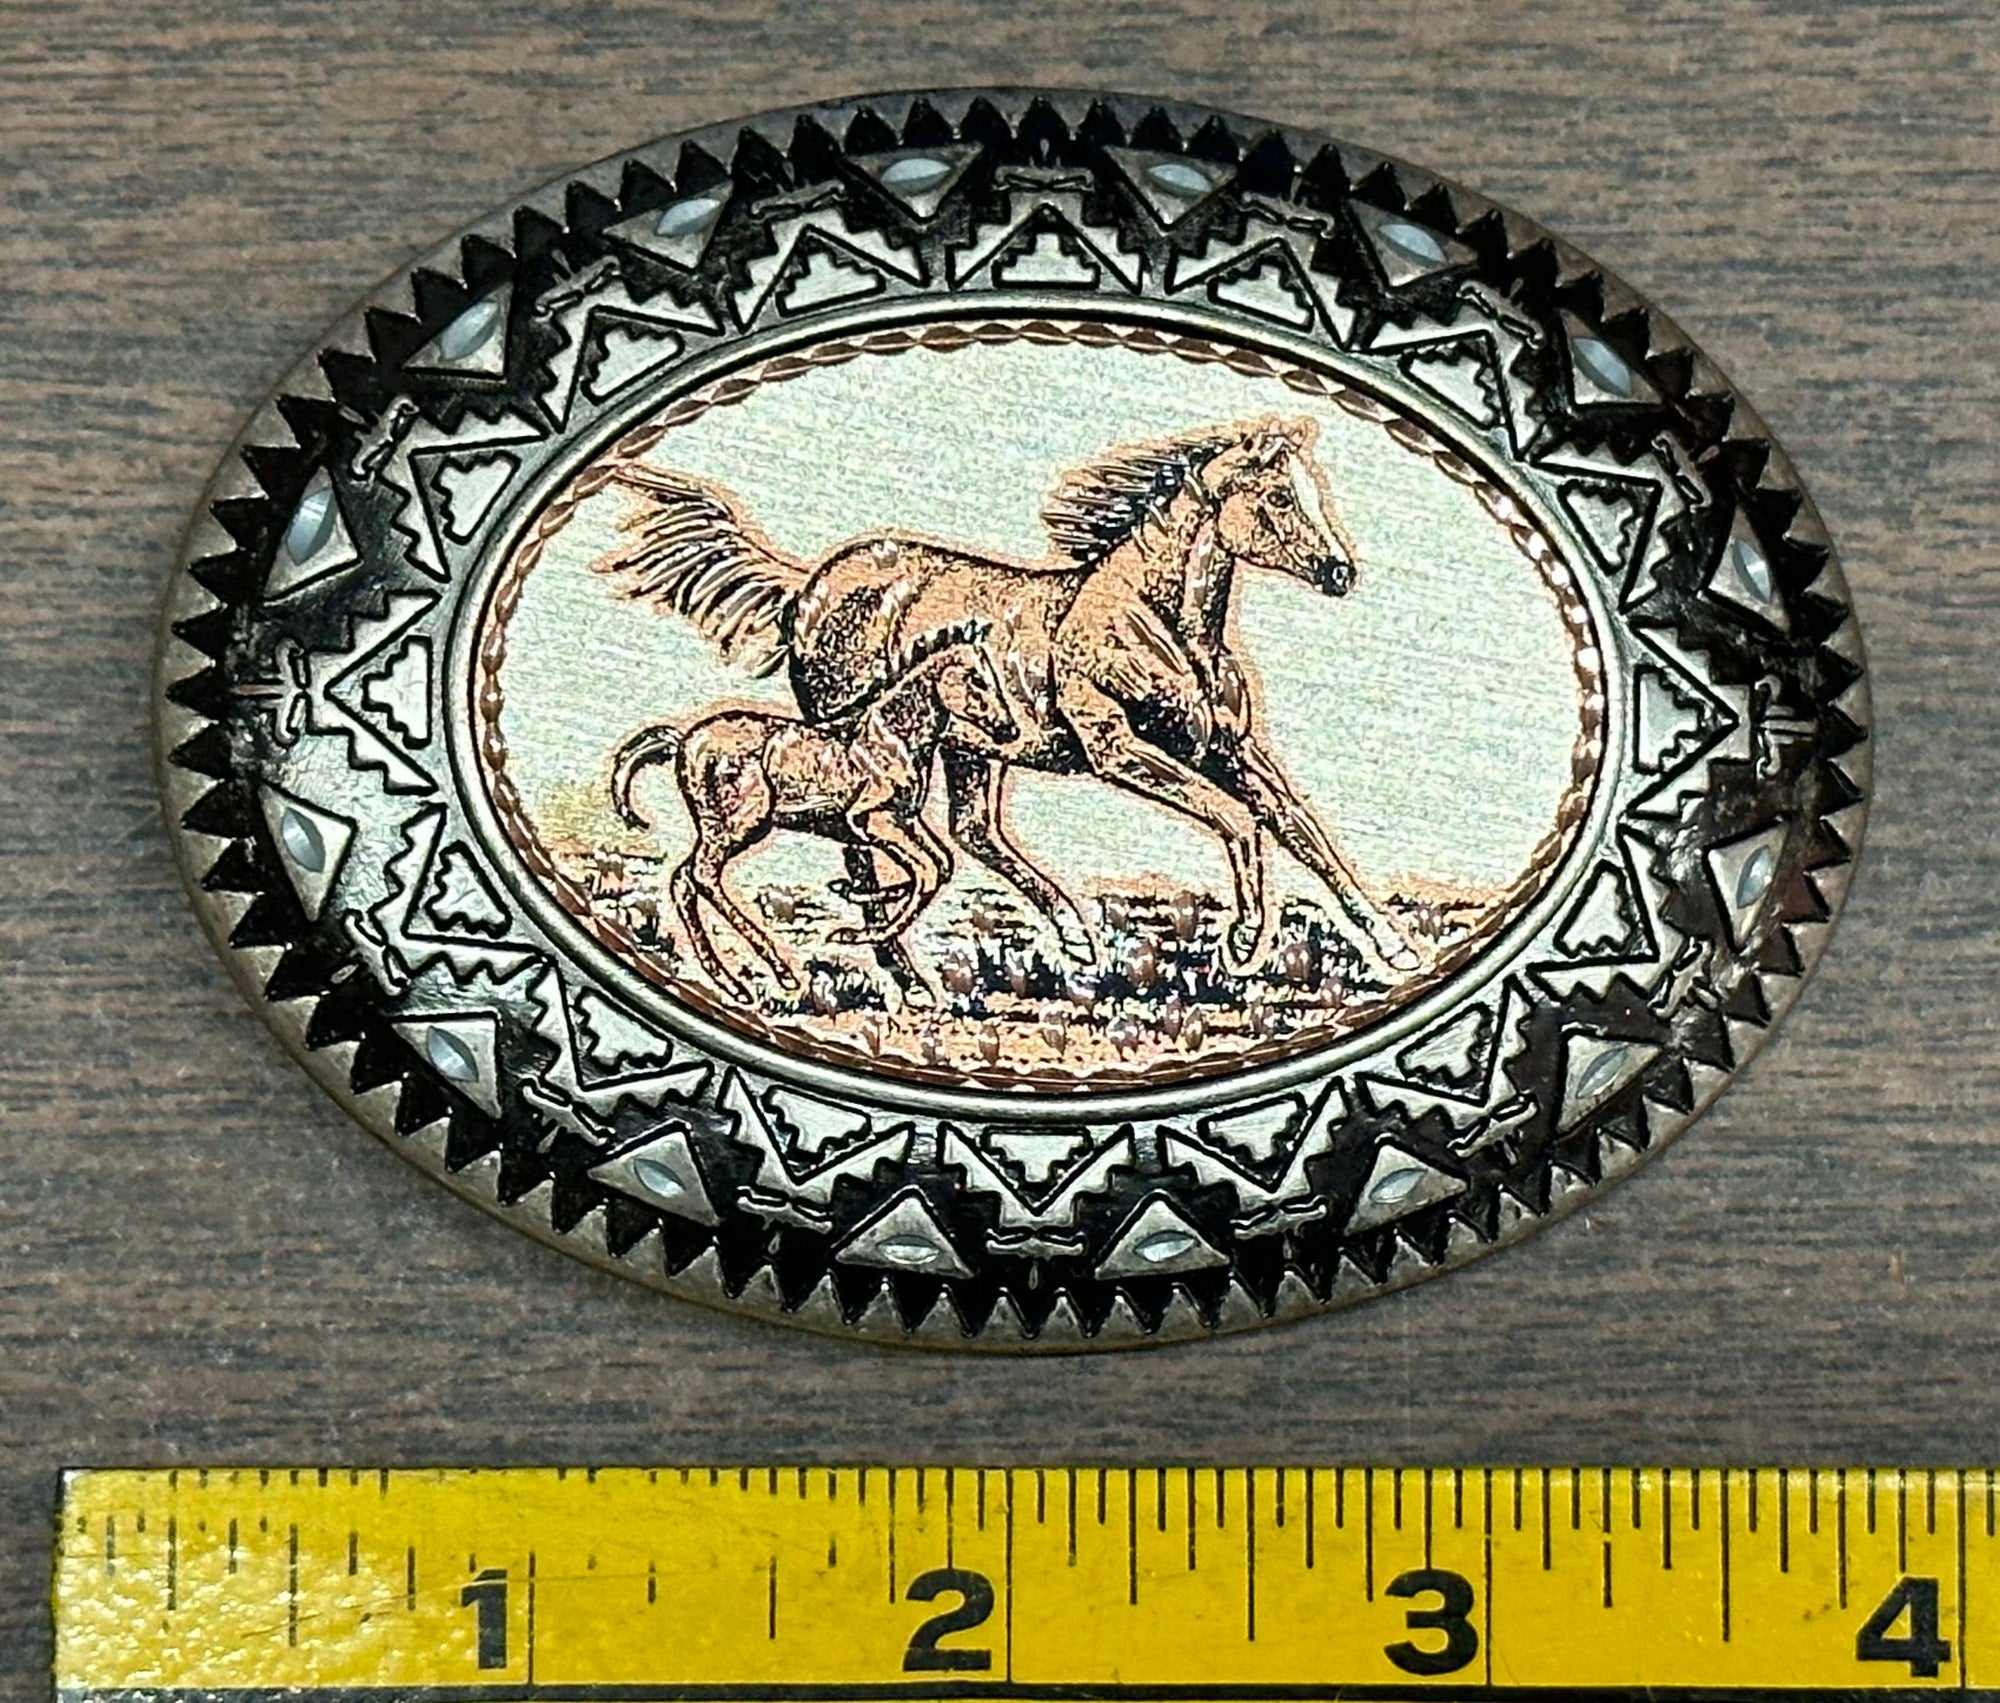 A Square Dance Buckle from Square Up Fashions, featuring a horse and foal, perfect for adding a touch of wilderness to your outfit.